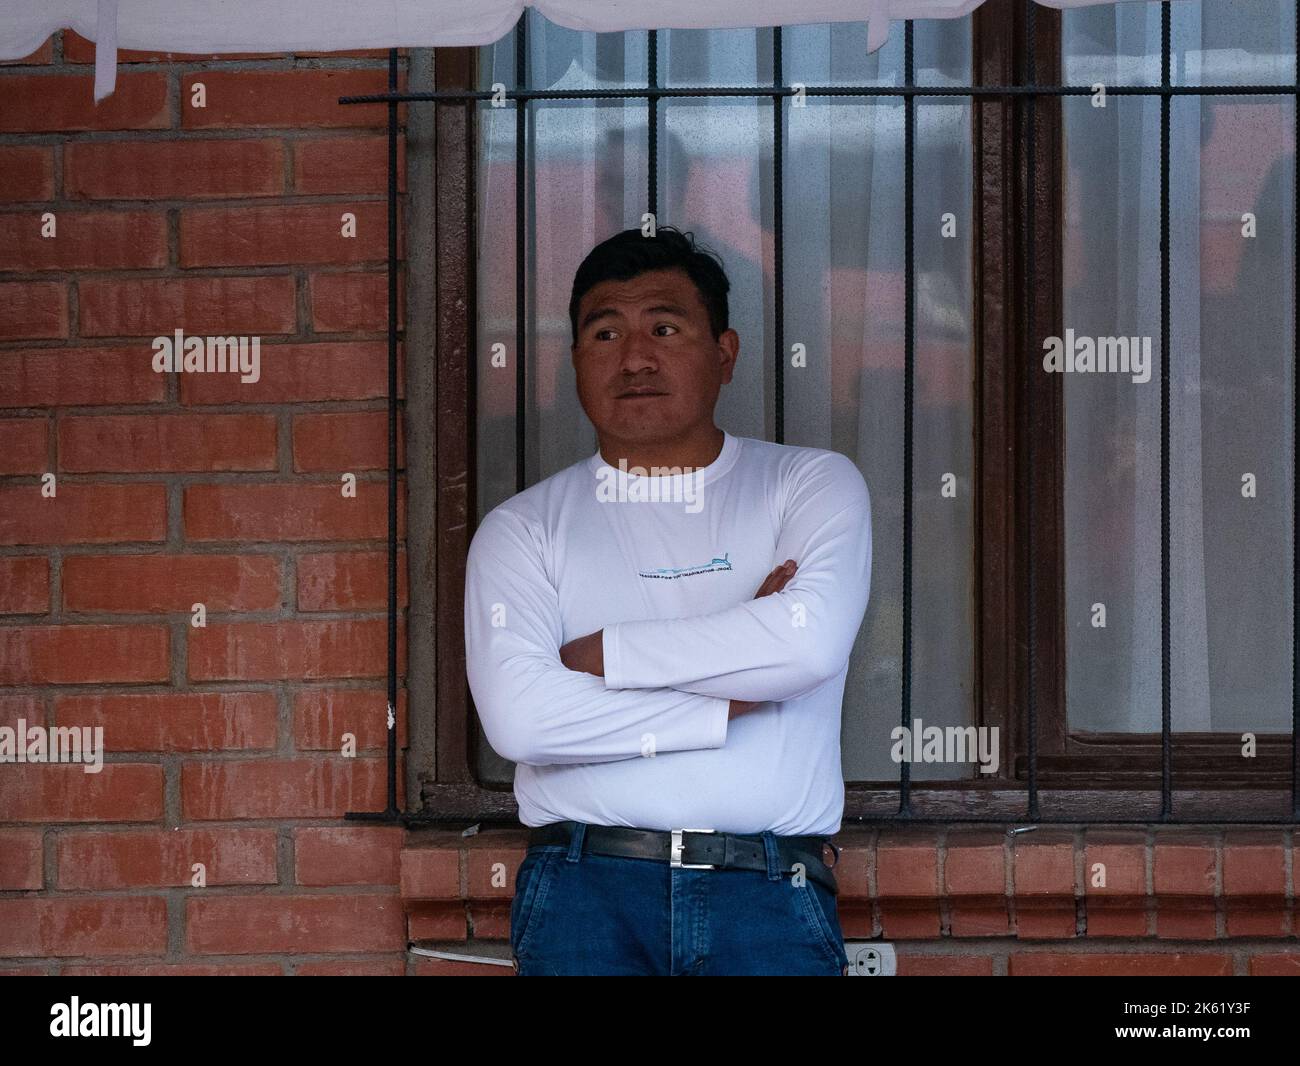 La Paz, Bolivia - September 10 2022: Bolivian Man Leaning against Window Watching Children's Birthday Party Stock Photo